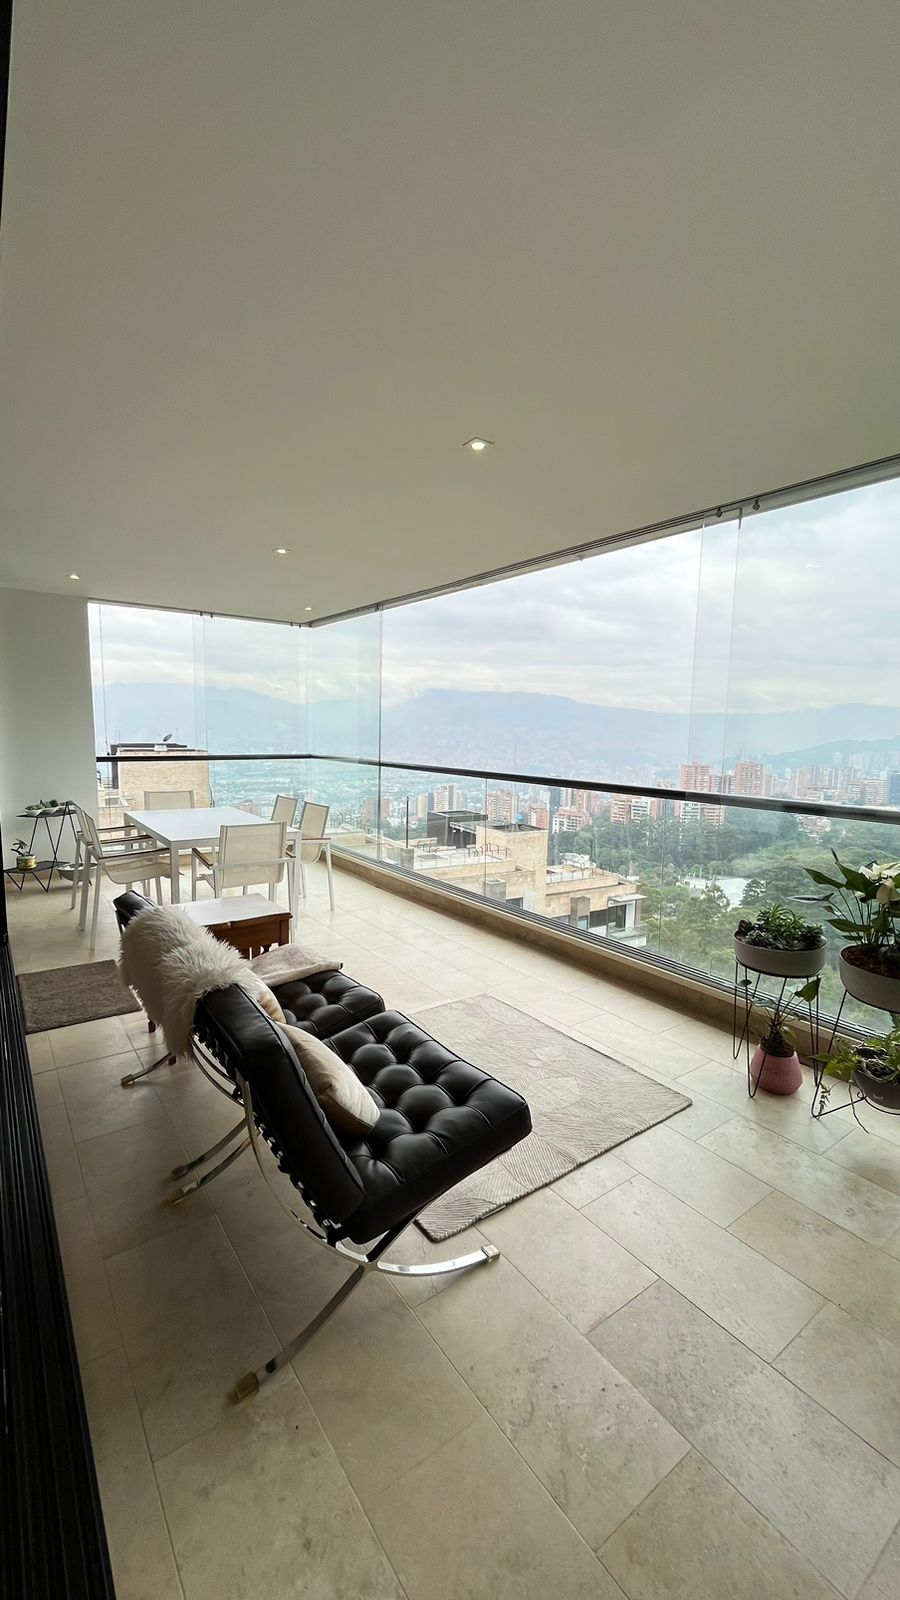 Spectacular 14th Floor El Poblado Apartment With Panoramic Mountain Views and Direct Elevator Access